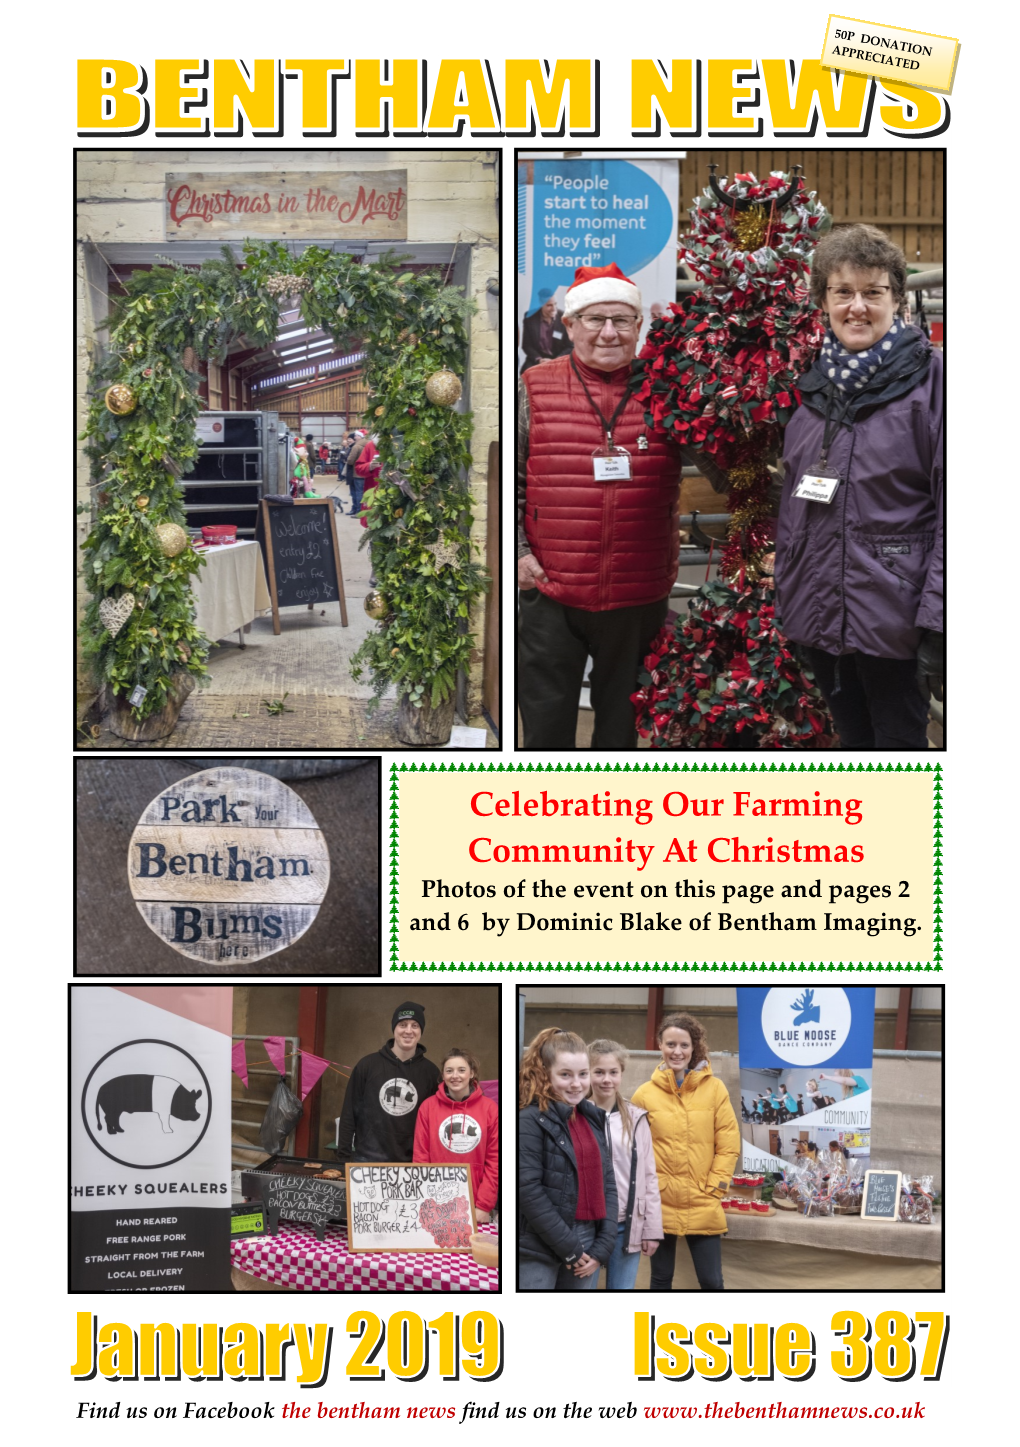 Celebrating Our Farming Community at Christmas Photos of the Event on This Page and Pages 2 and 6 by Dominic Blake of Bentham Imaging